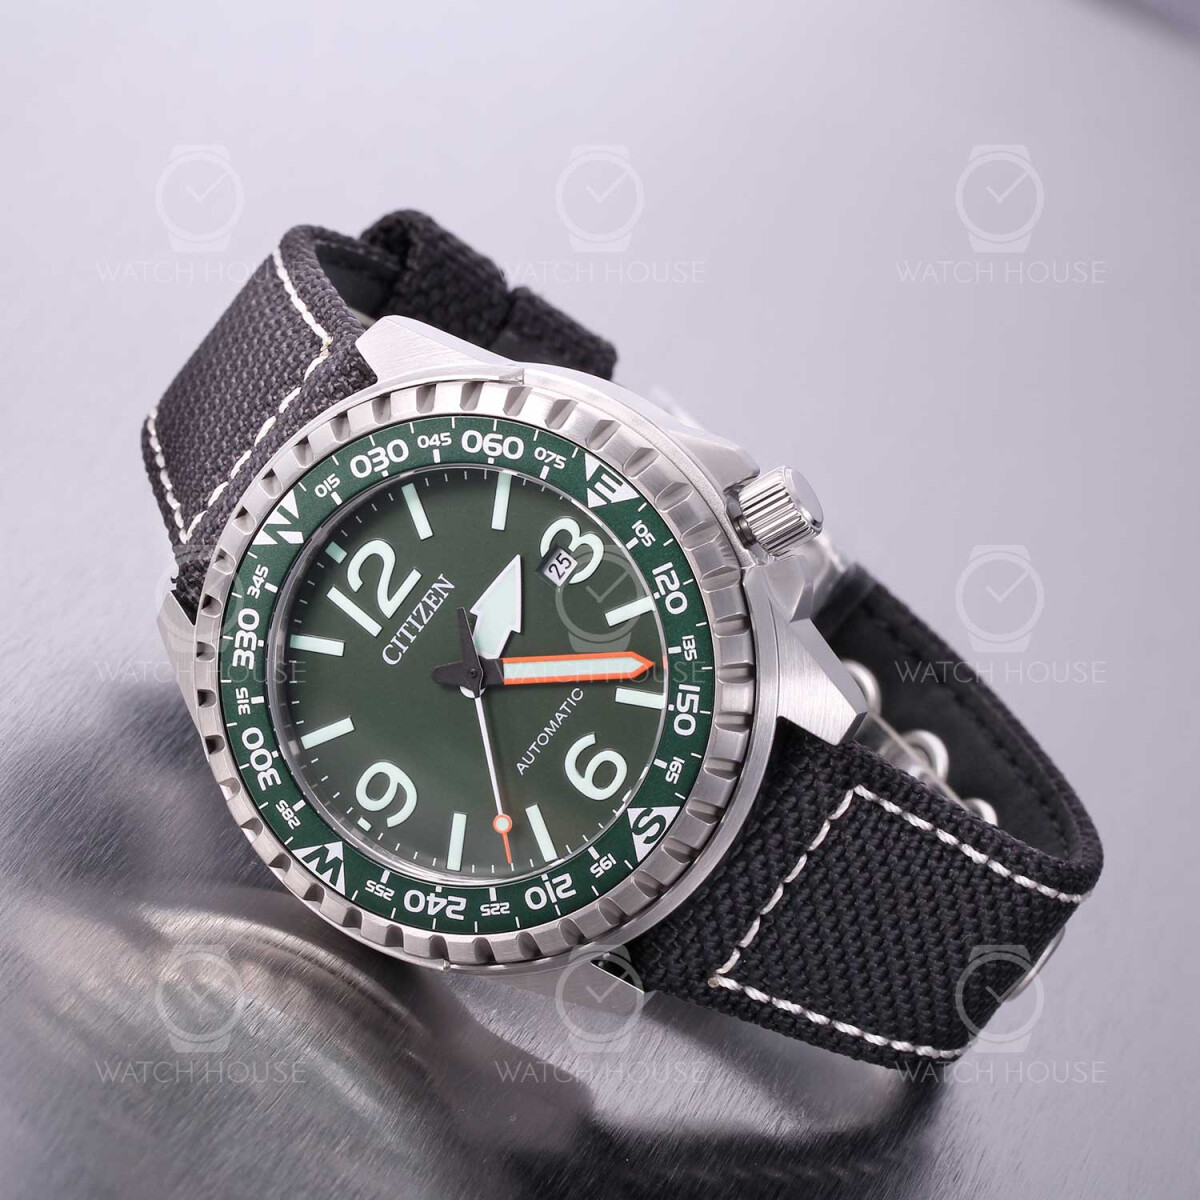 Citizen mens automatic watch in green military style...